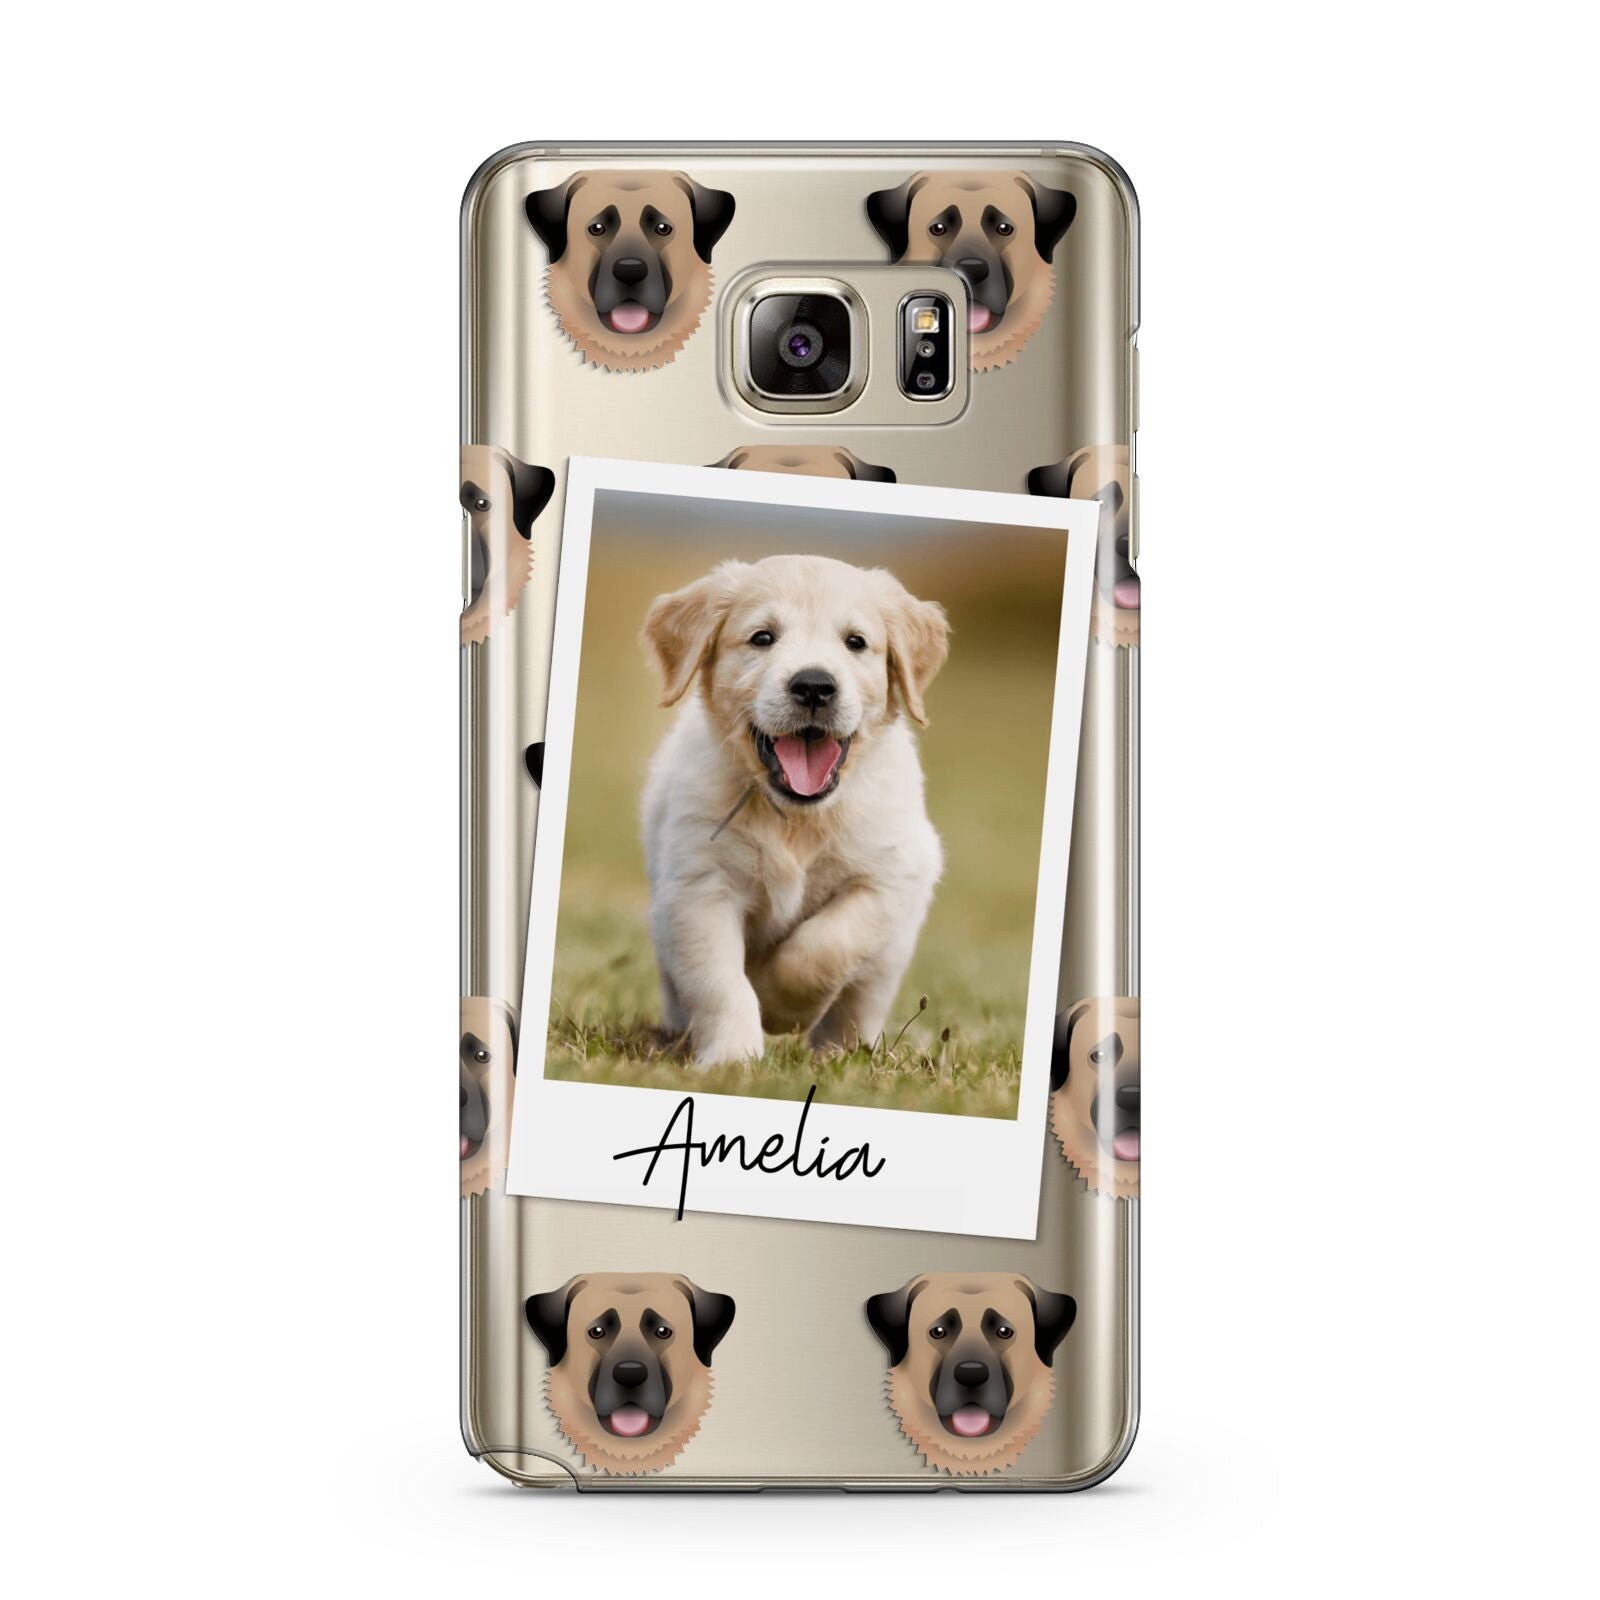 Personalised Dog Photo Samsung Galaxy Note 5 Case